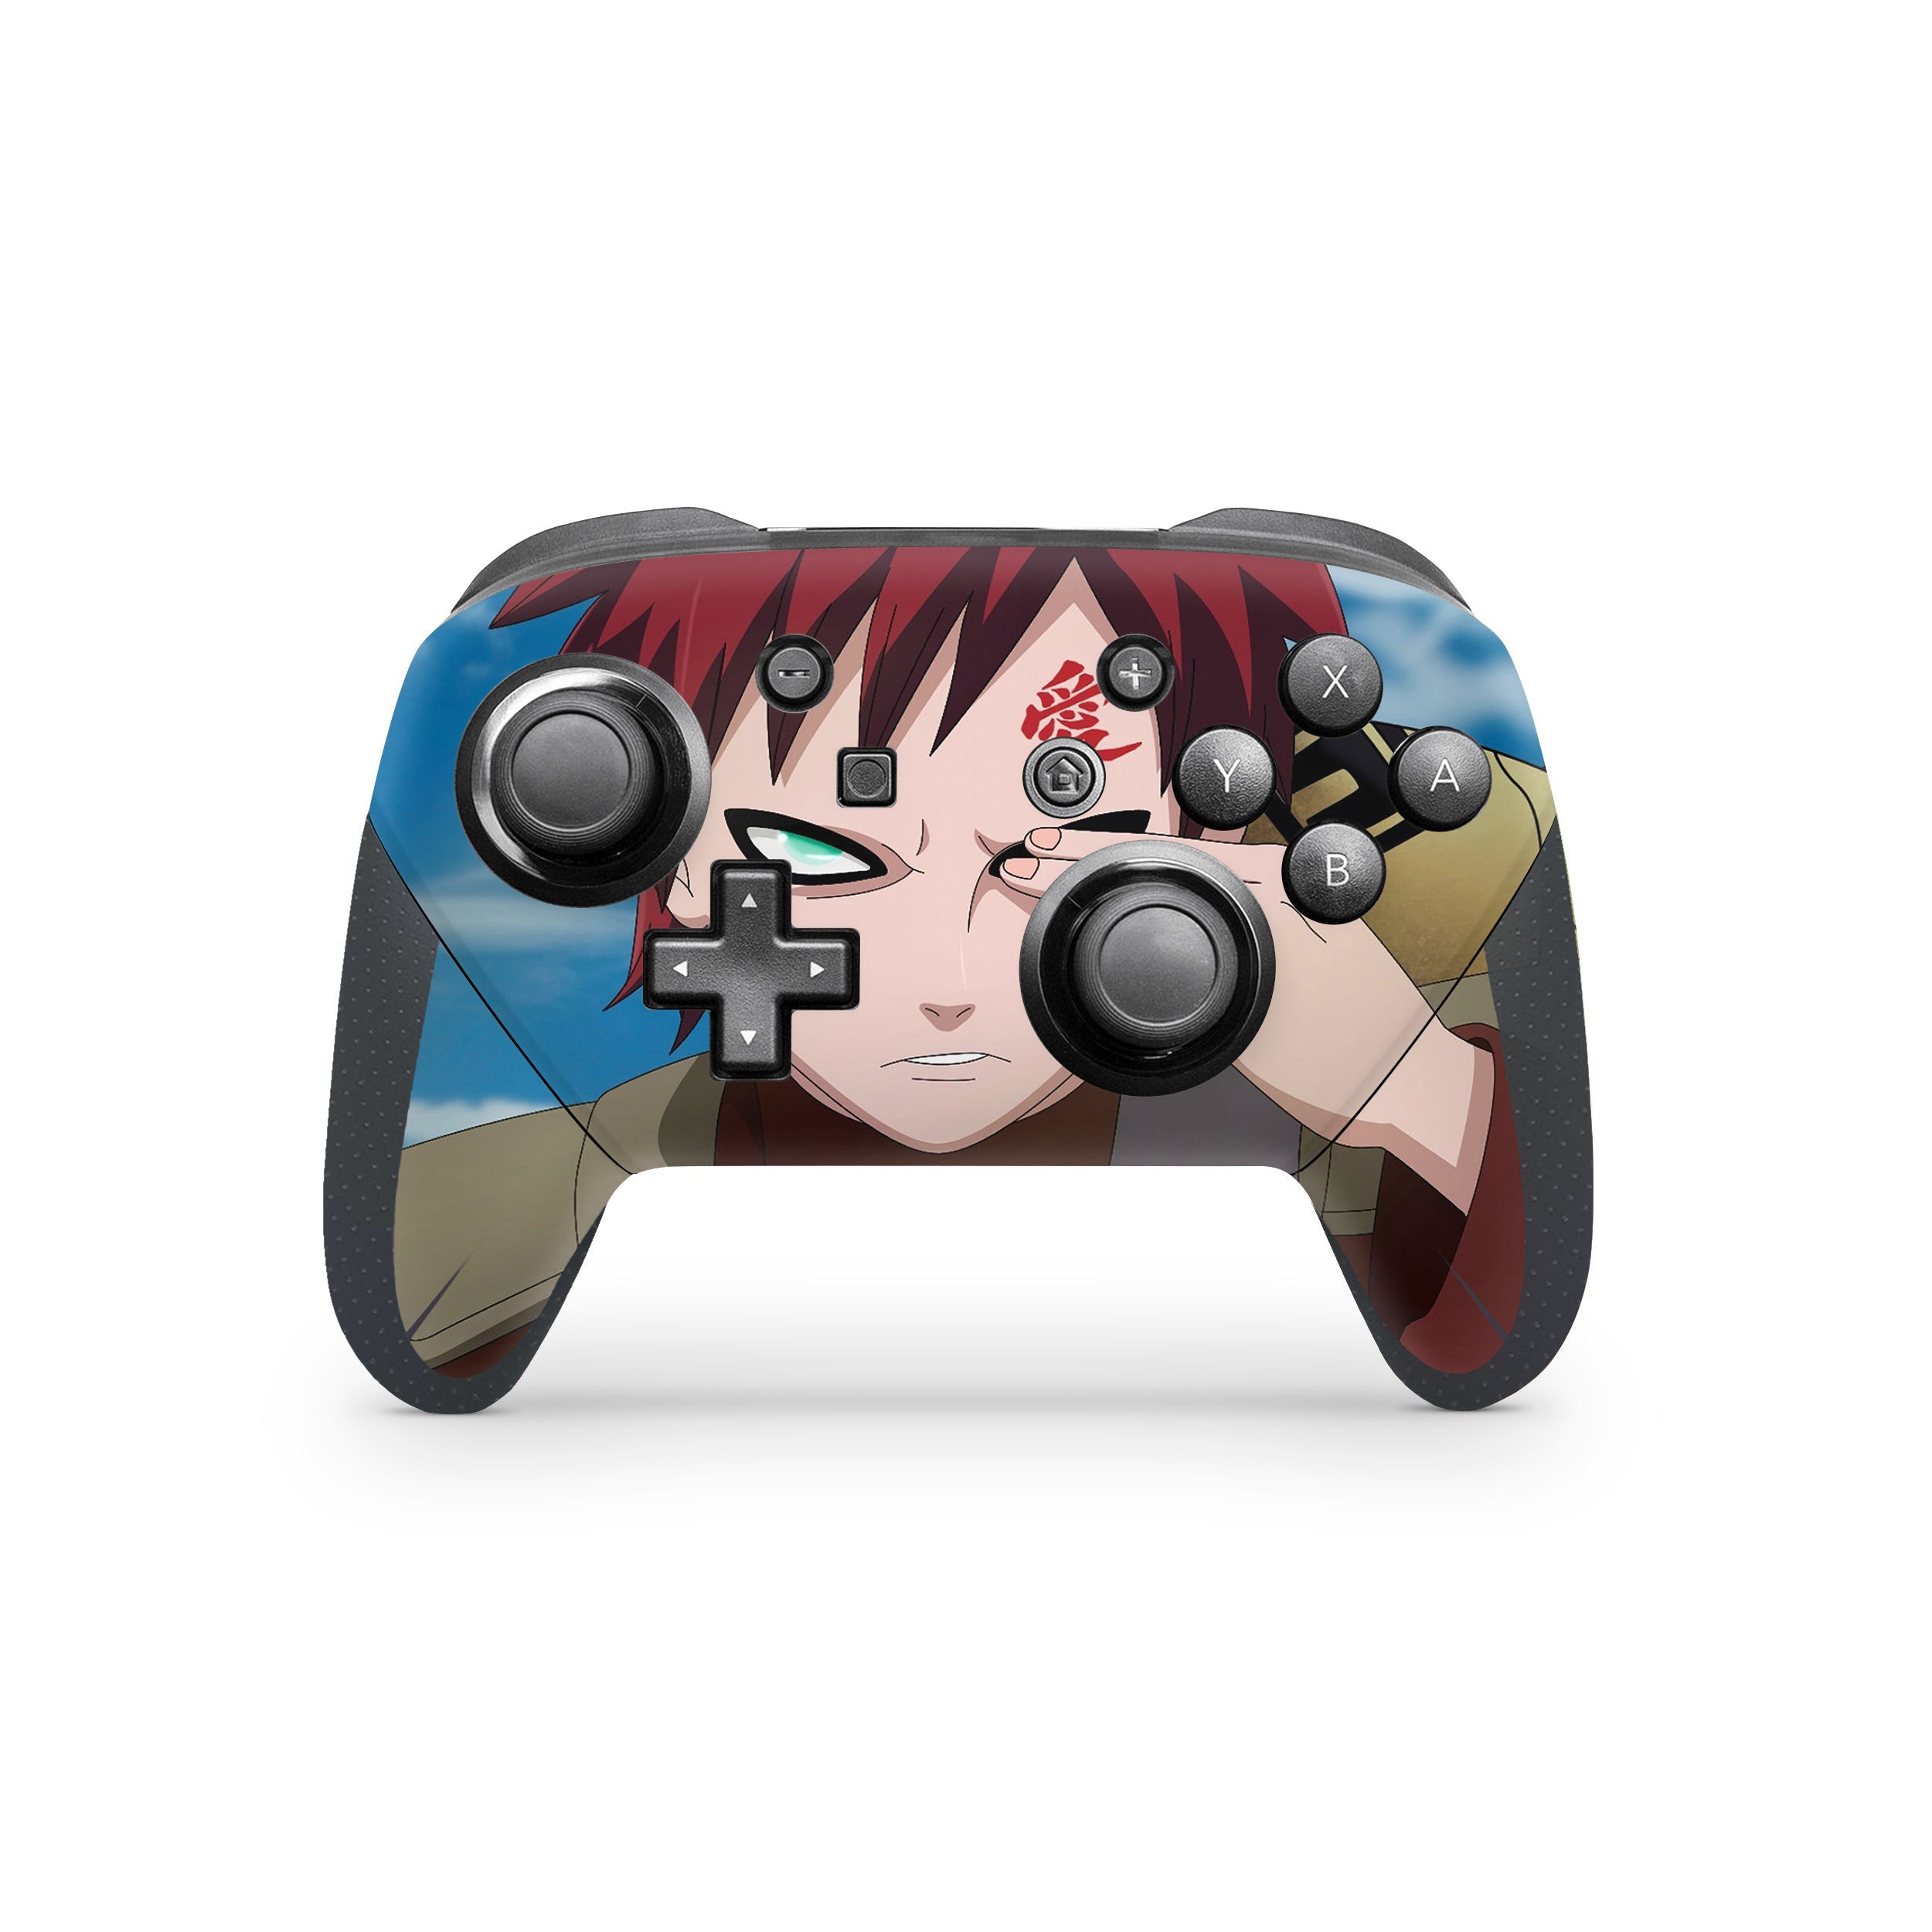 A video game skin featuring a Naruto Gaara design for the Switch Pro Controller.